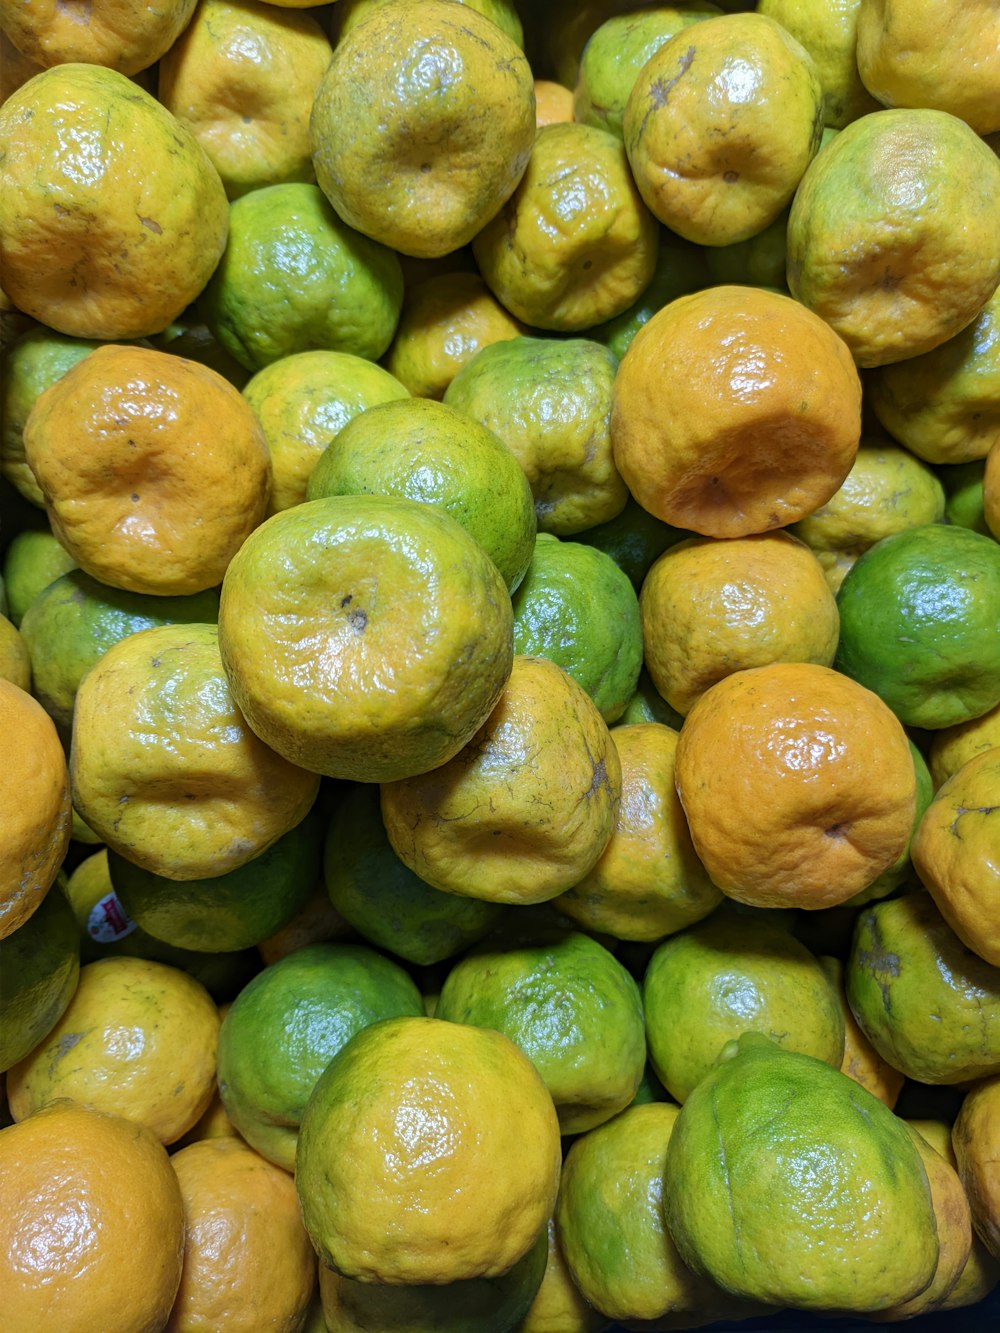 a pile of lemons and limes sitting next to each other